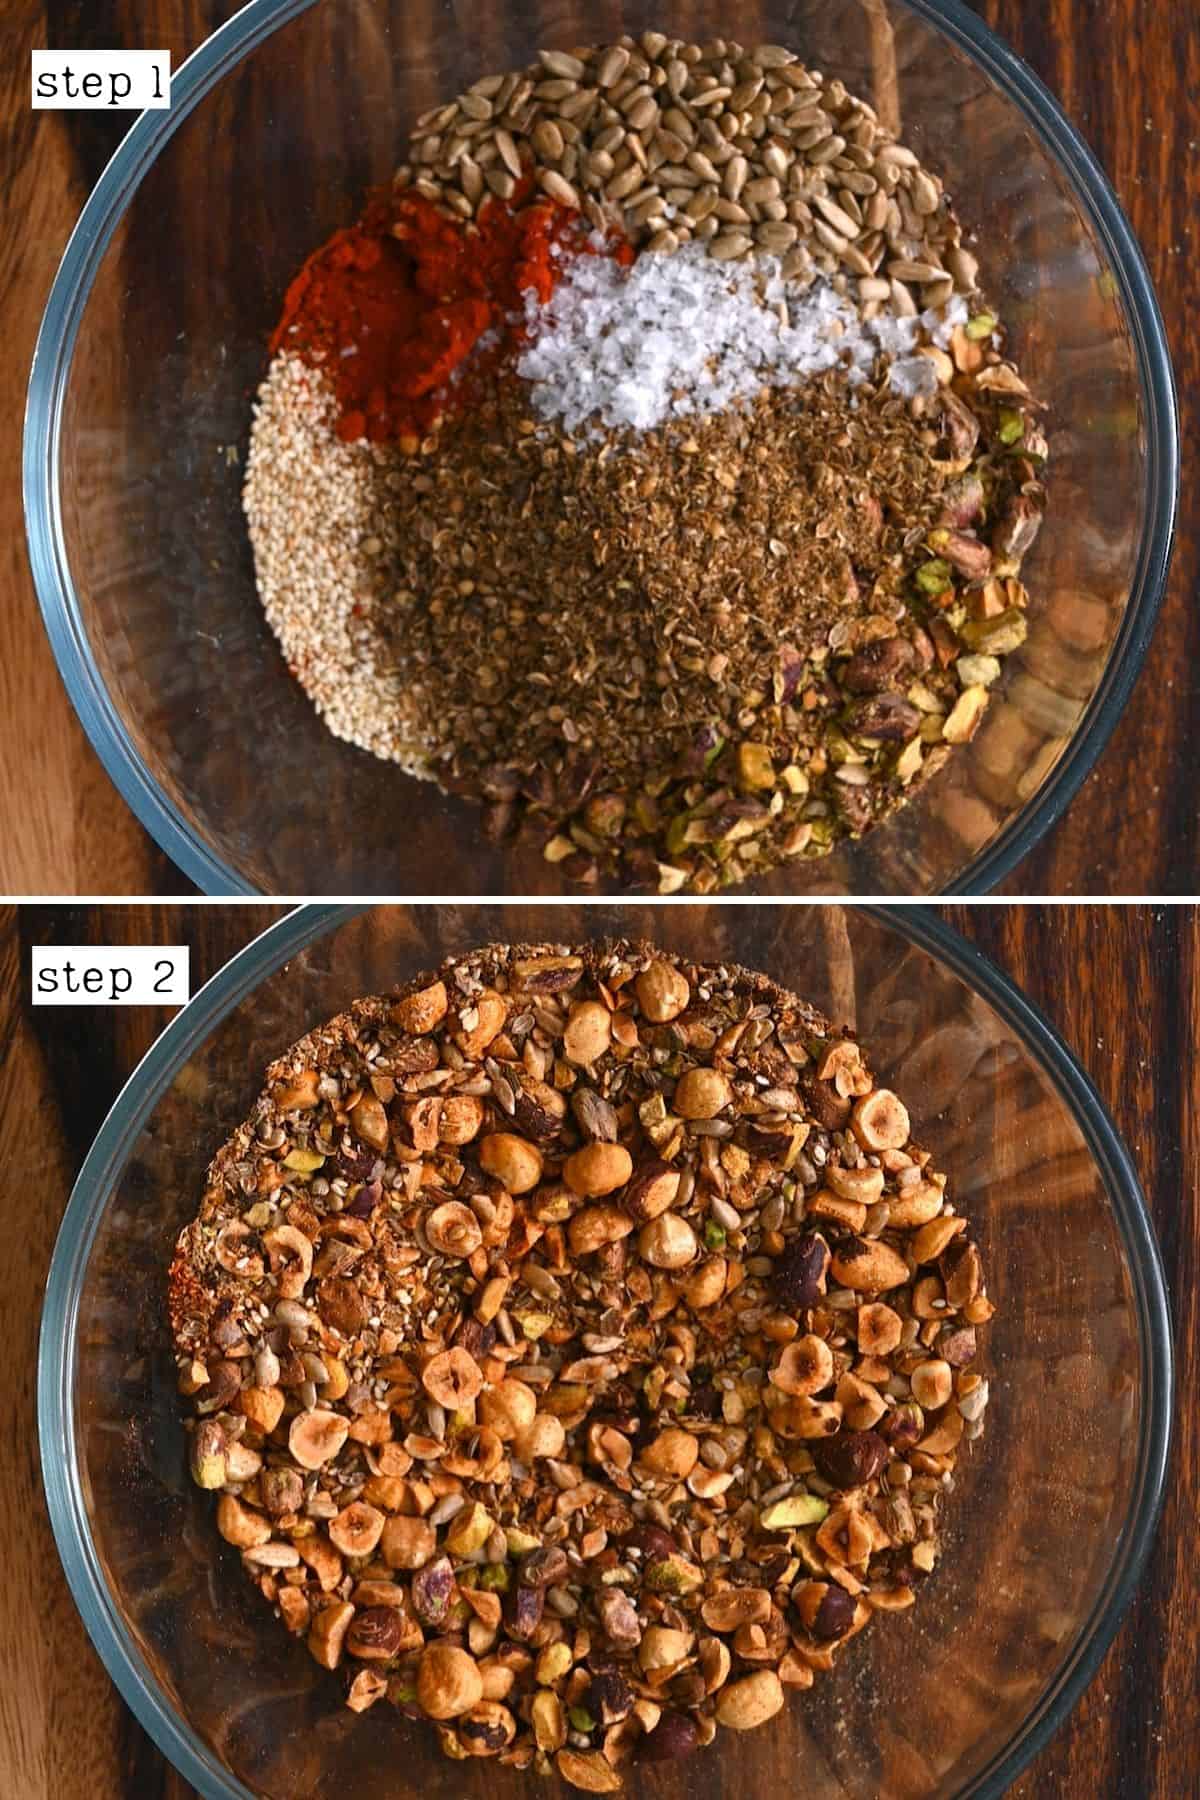 Steps for mixing dukkah spice